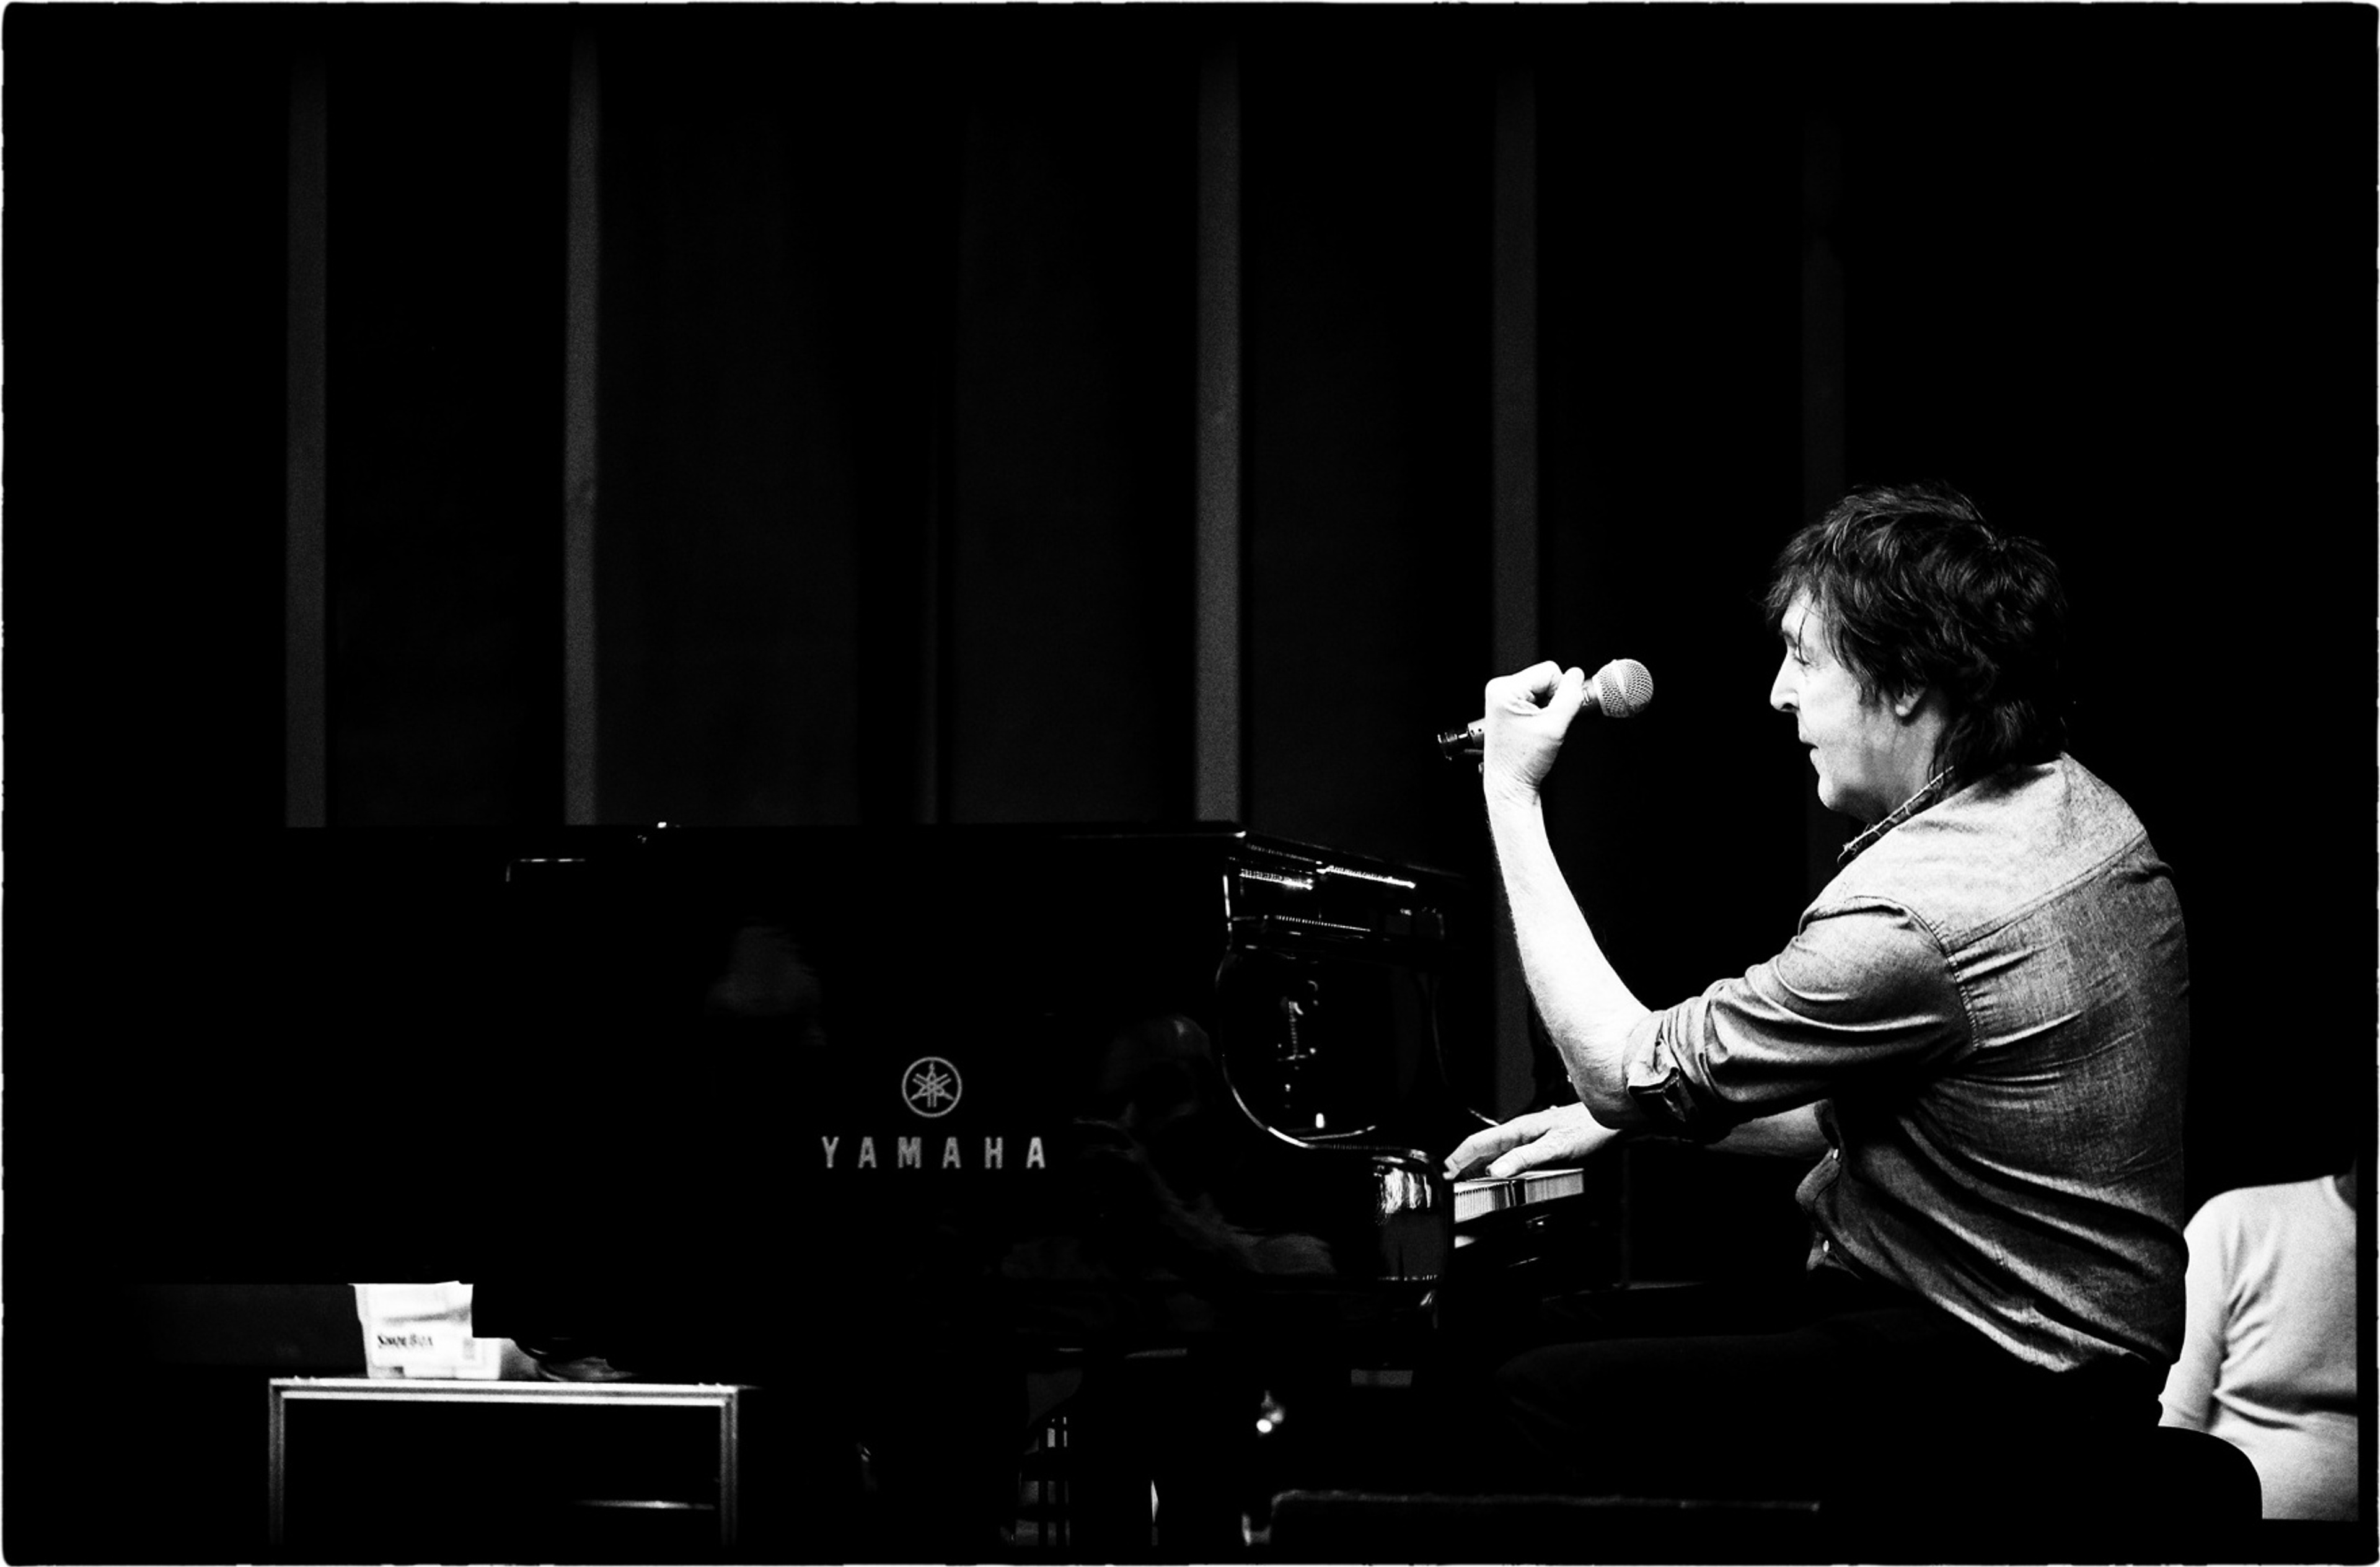 Paul at his piano during rehearsals, Los Angeles, April 13th 2013